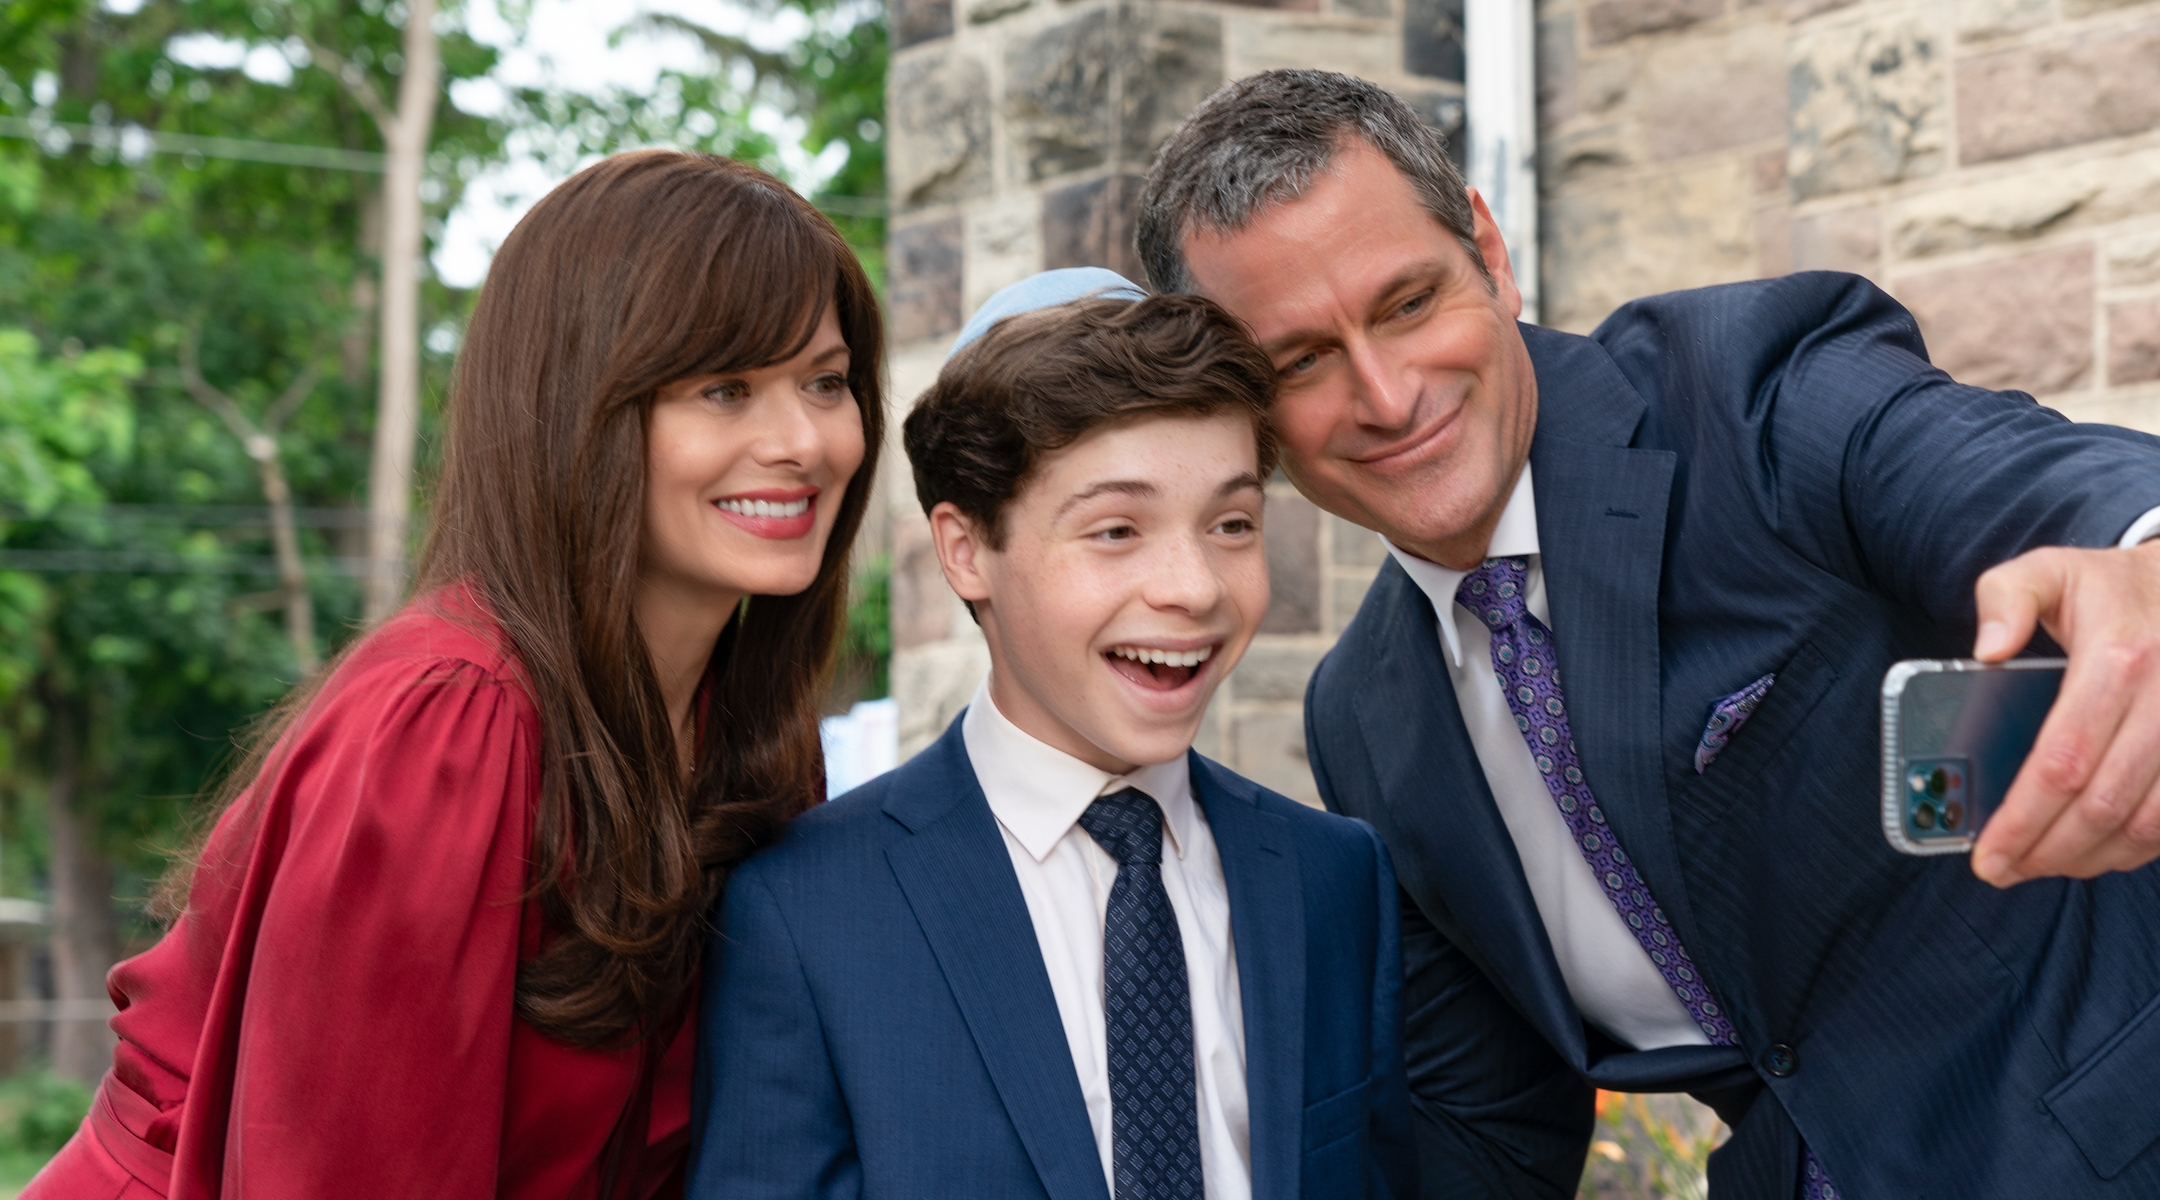 Eli Golden, center, stars in “13: The Musical,” a Netflix movie that features Debra Messing and Peter Hermann as his parents. (Alan Markfield/Netflix)